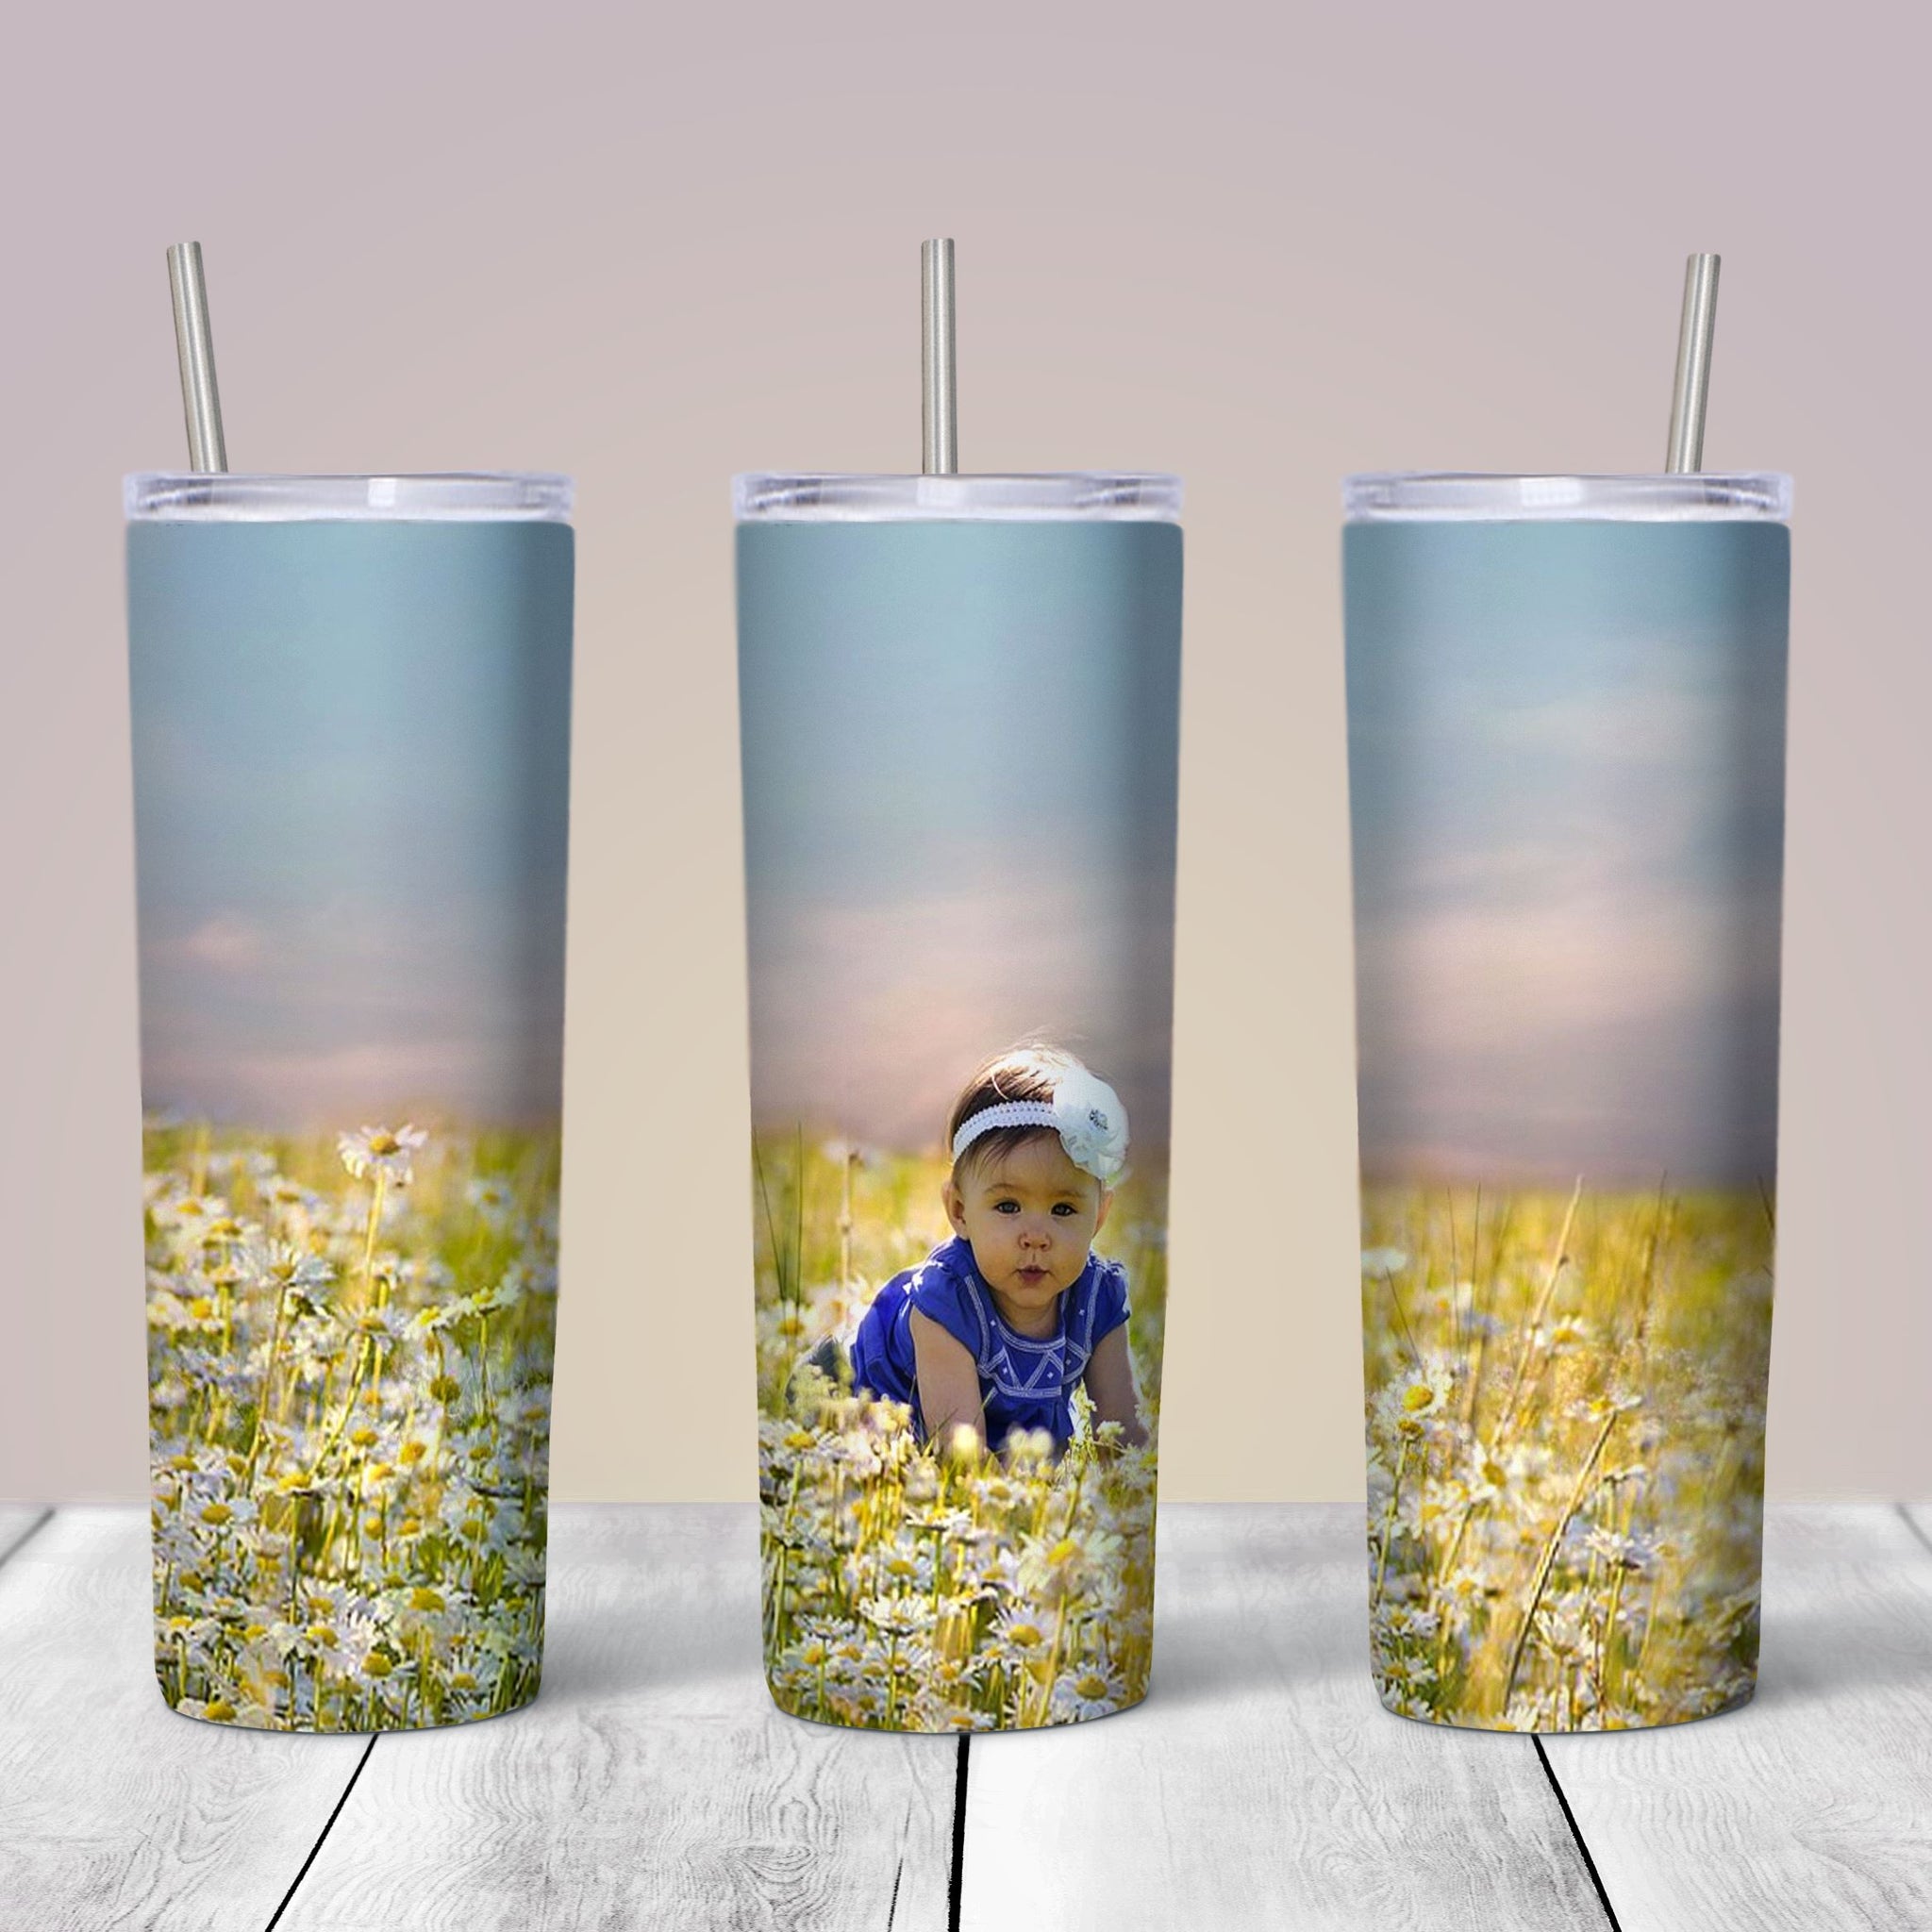 Sublimation Glass Cans Blanks - Wholesale Transfer paper, Craft vinyls,  Tattoo paper,Sublimation Tumblers and Heat Press